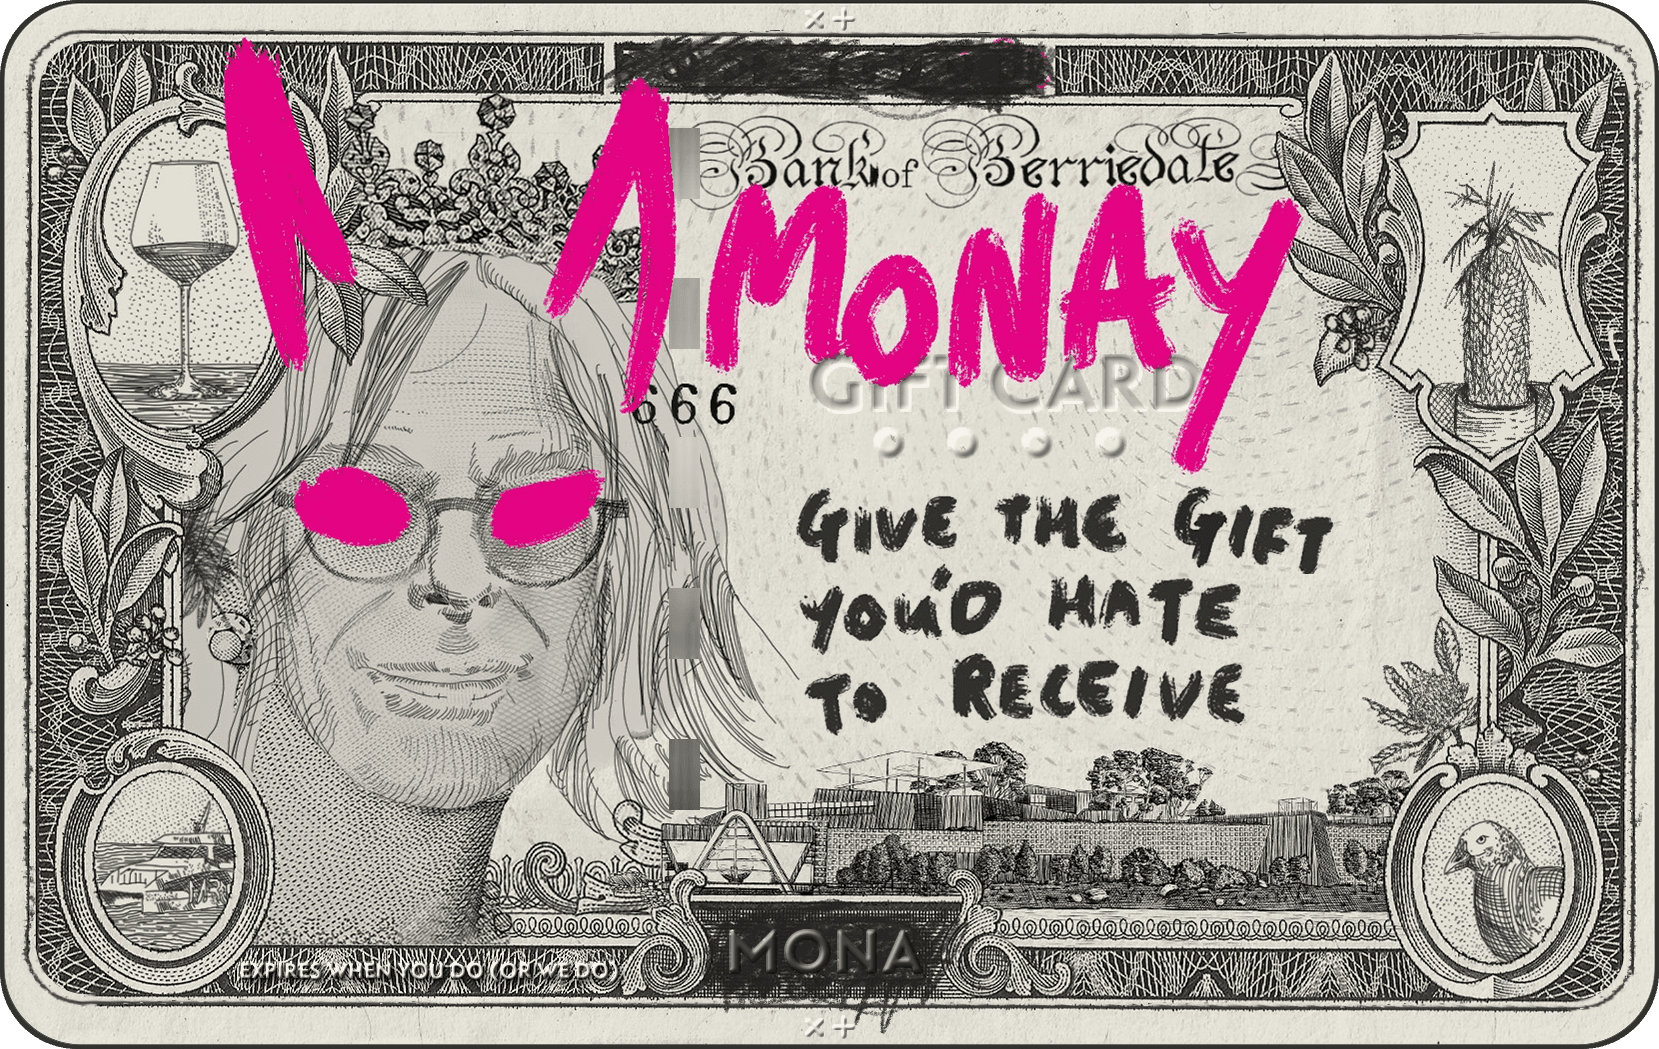 Picture of a Monay gift card with David Walsh's head, graffiti, and text "Gift the gift you'd hate to receive"